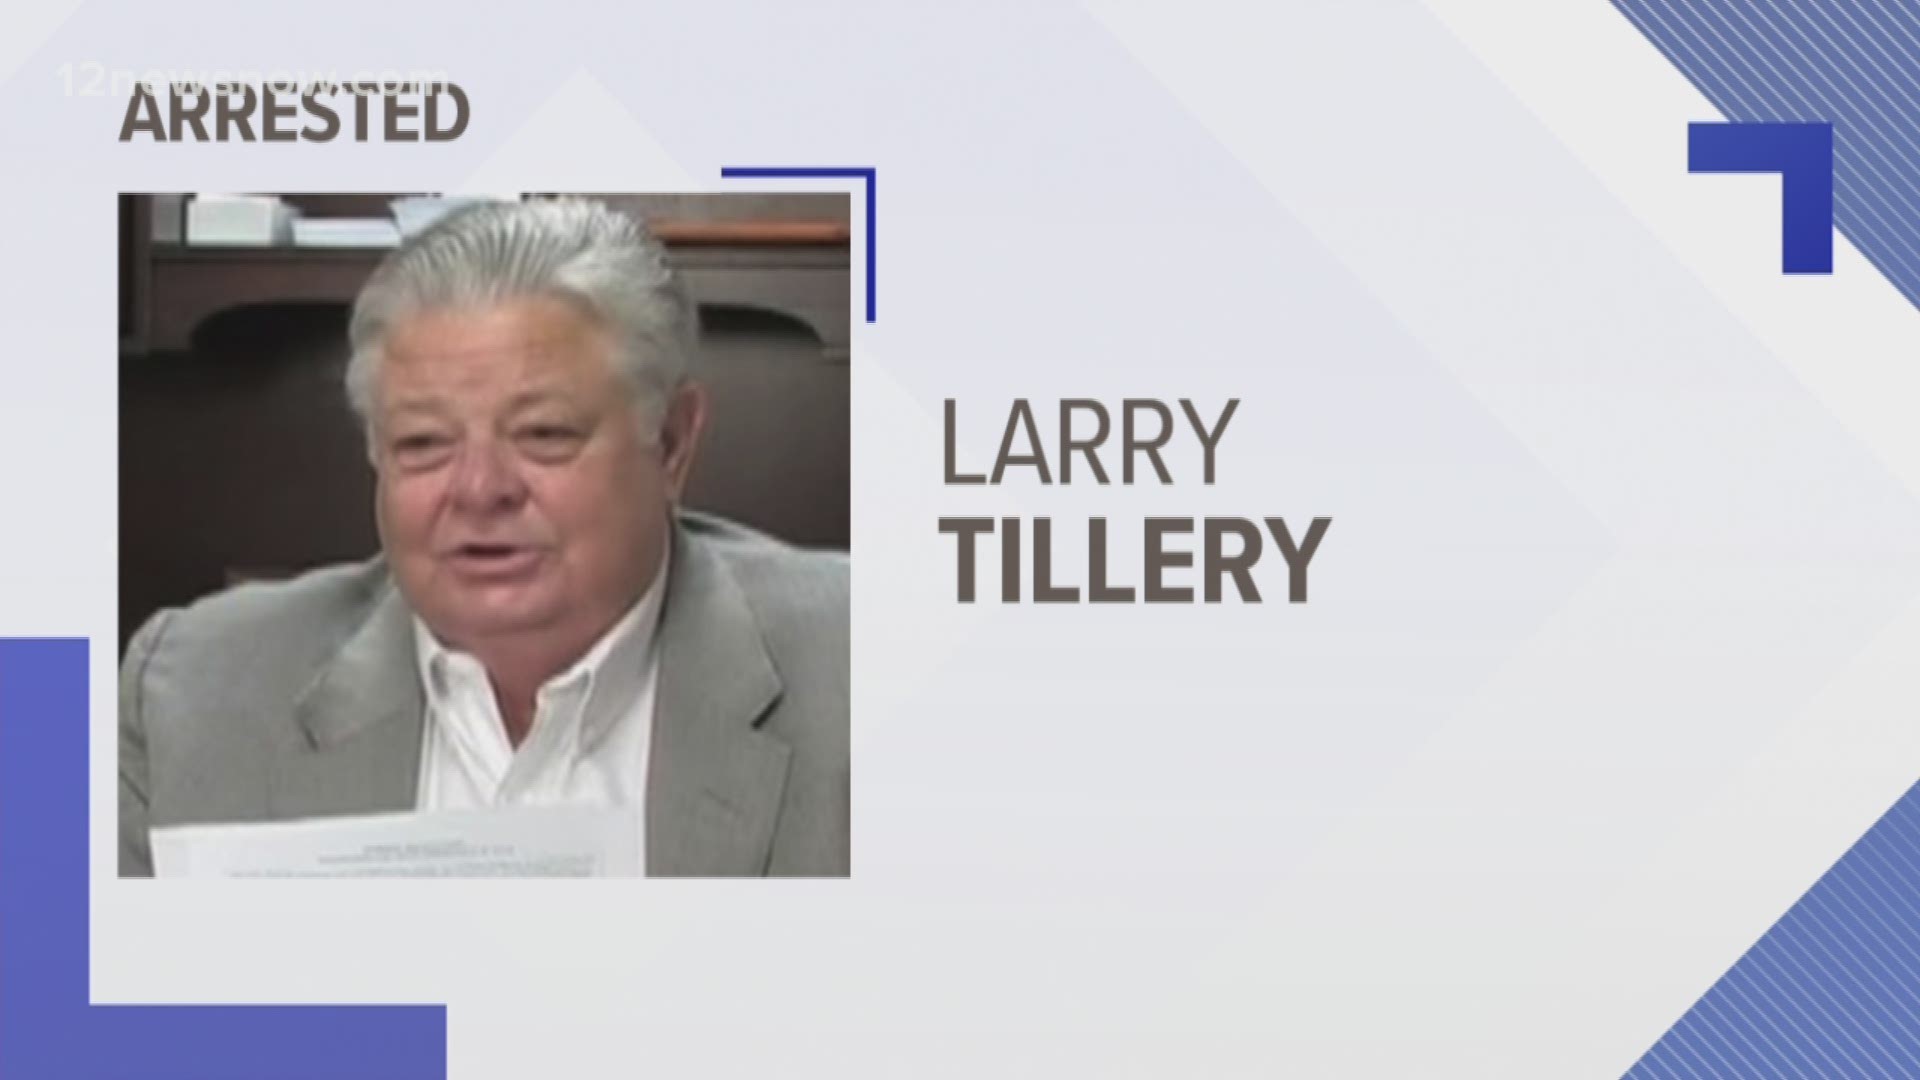 Larry Tillery will not be extradited to Louisiana and has been released.